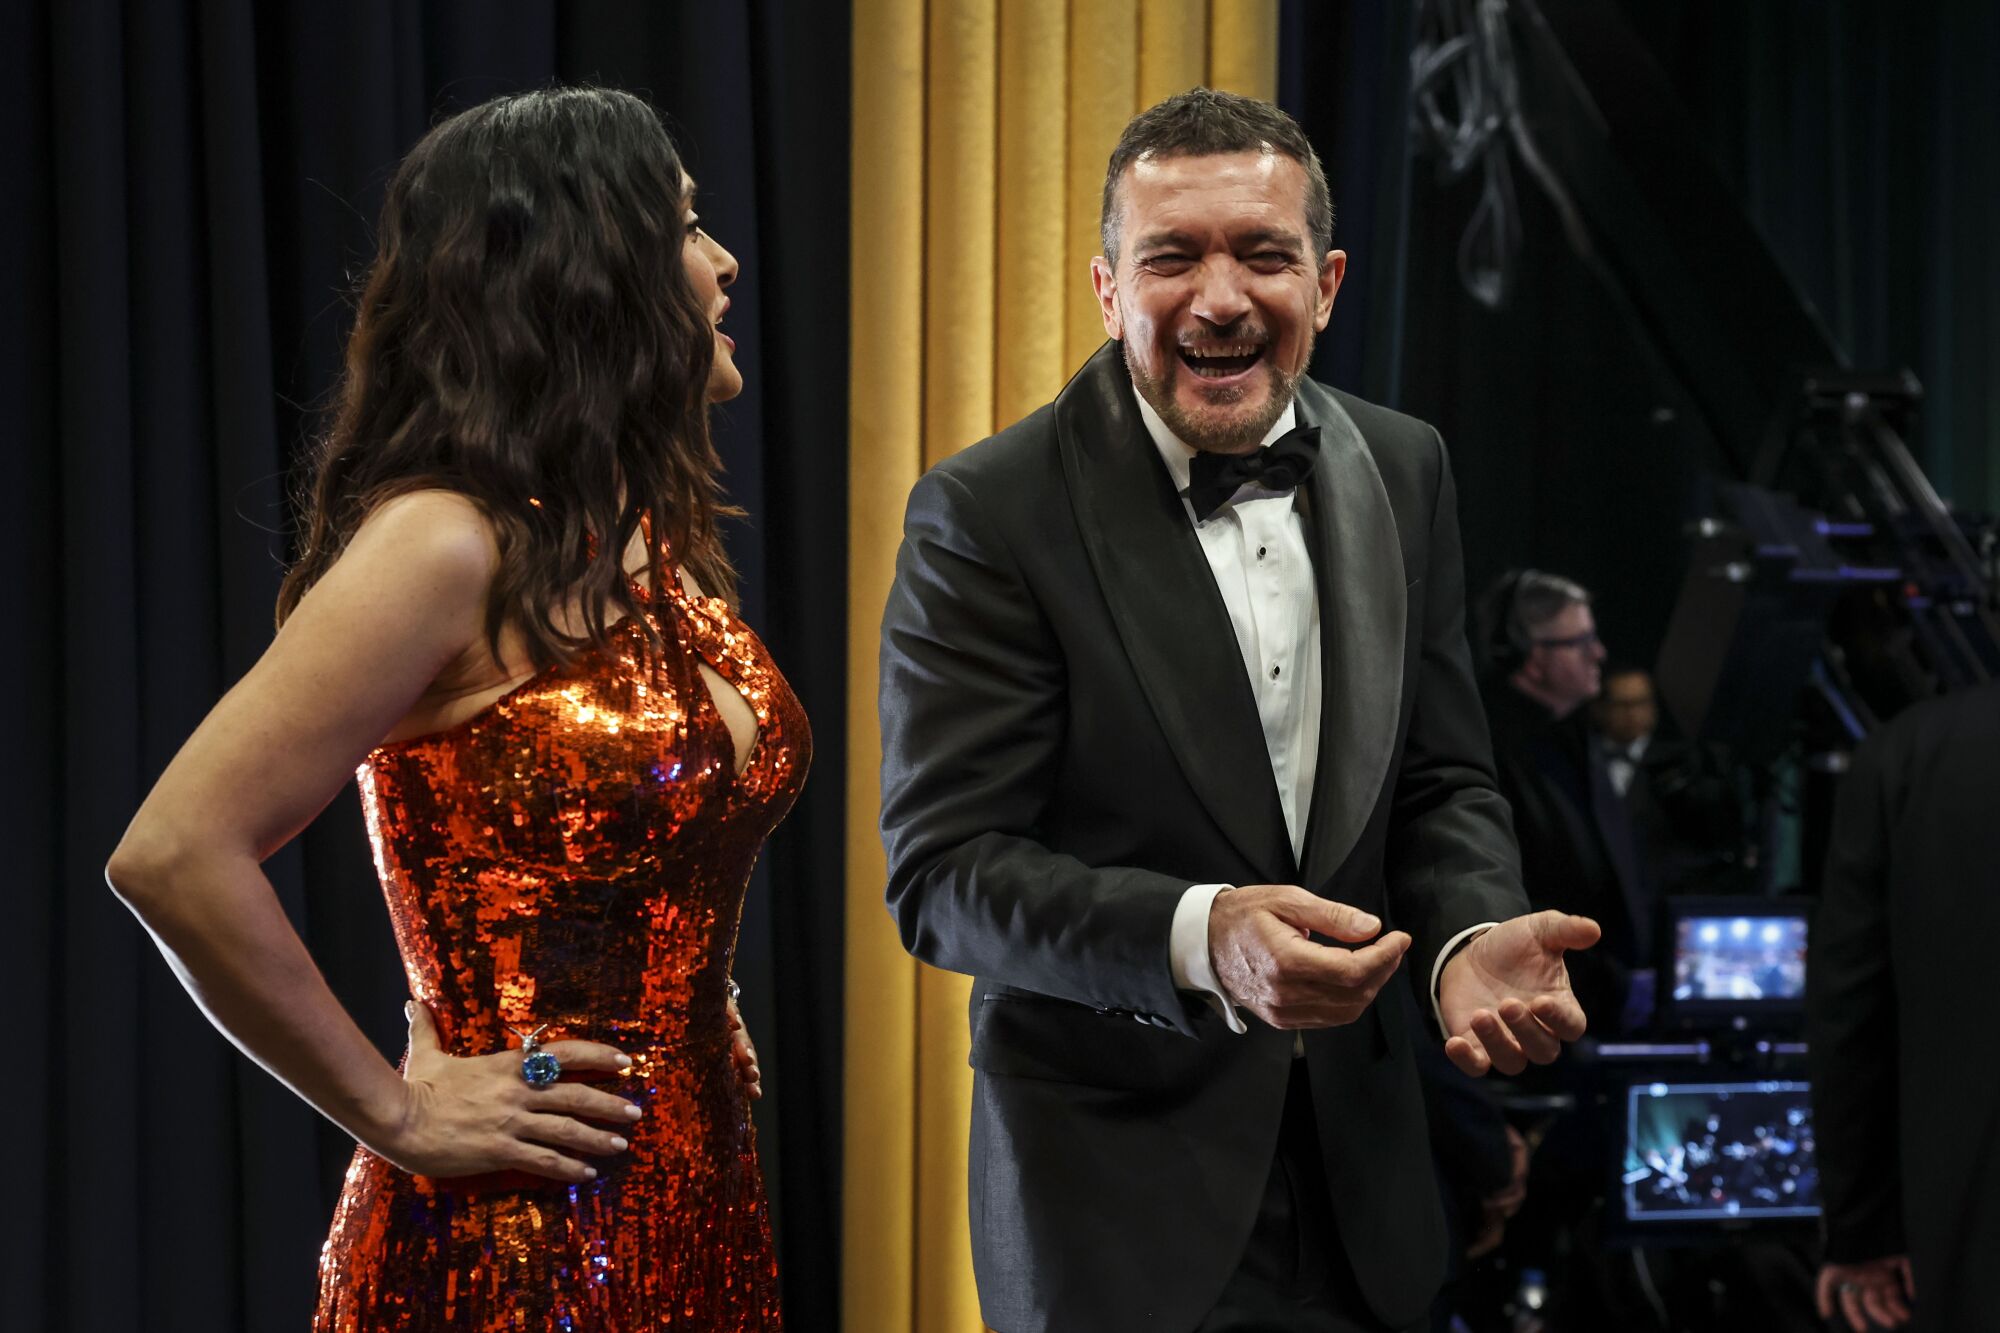 A woman in red and a man in a tux share a laugh backstage at the Oscars. 